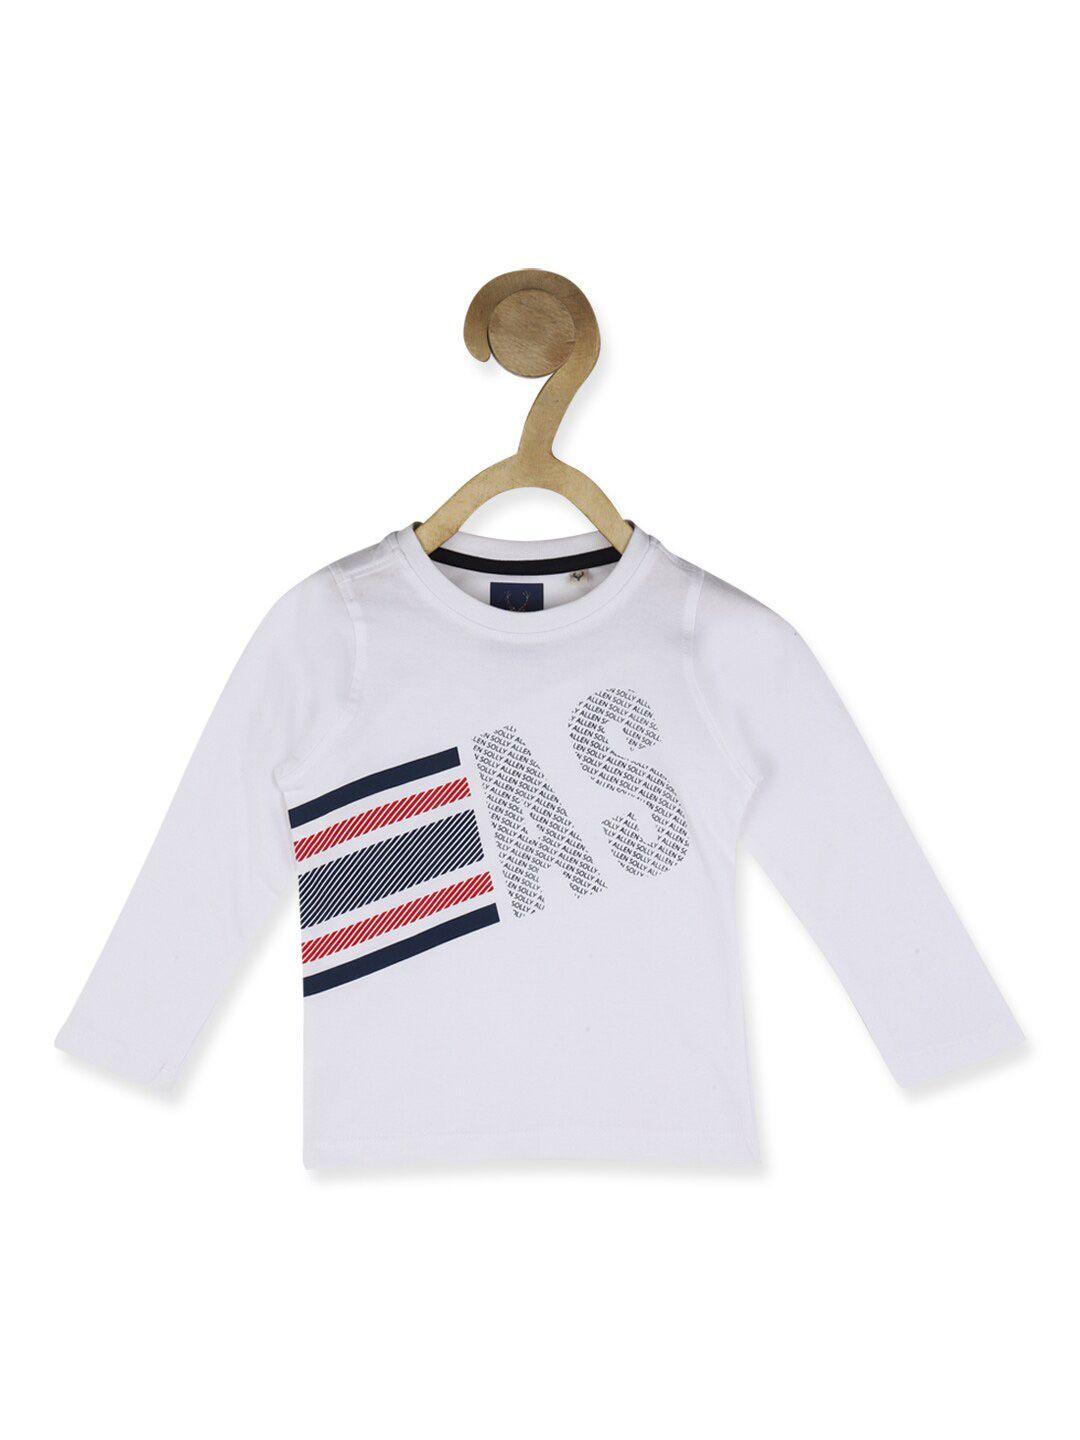 allen solly junior boys white typography printed t-shirt